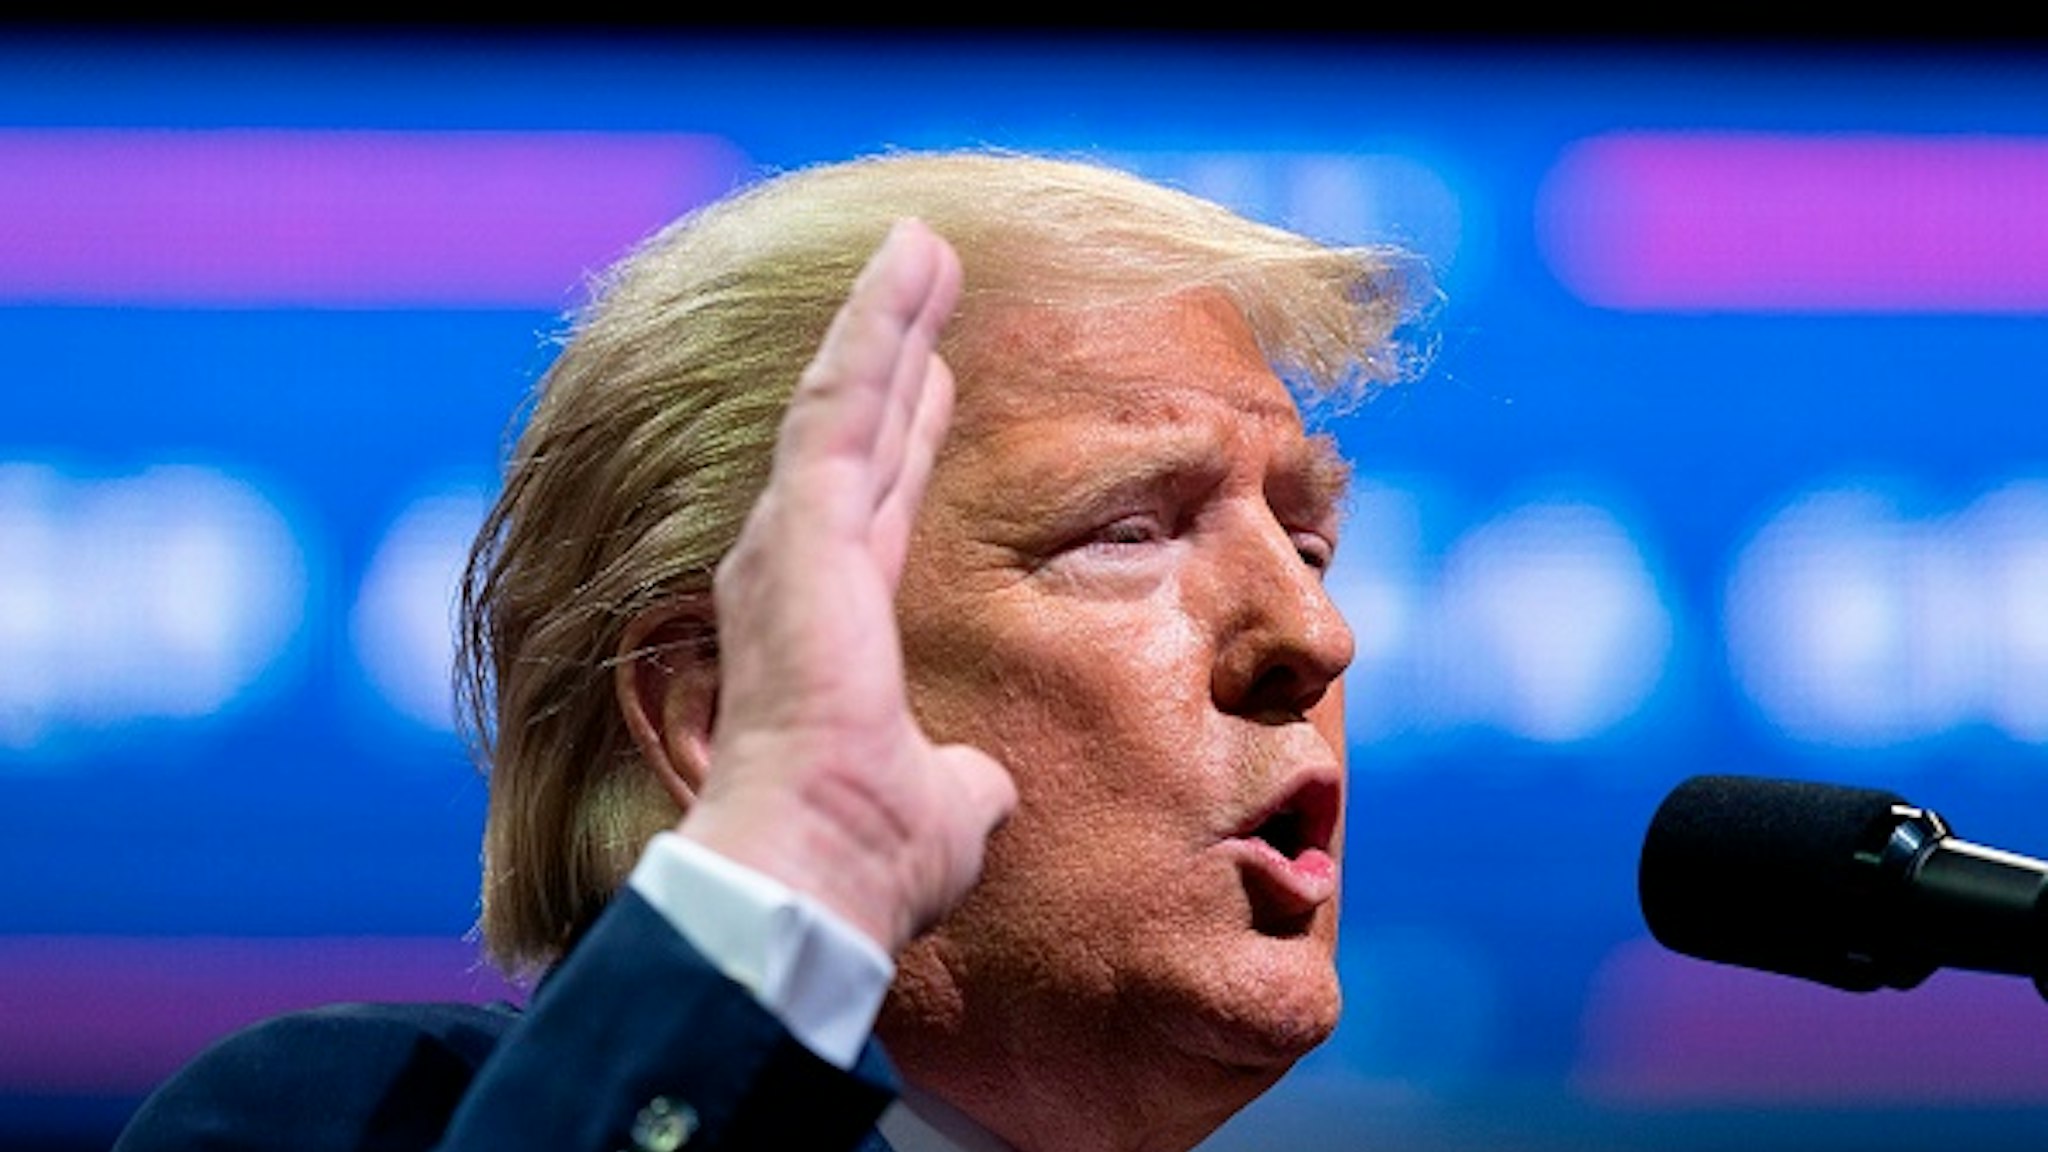 US President Donald Trump gestures as he addresses a "Keep America Great" rally in Colorado Springs, Colorado, on February 20, 2020.